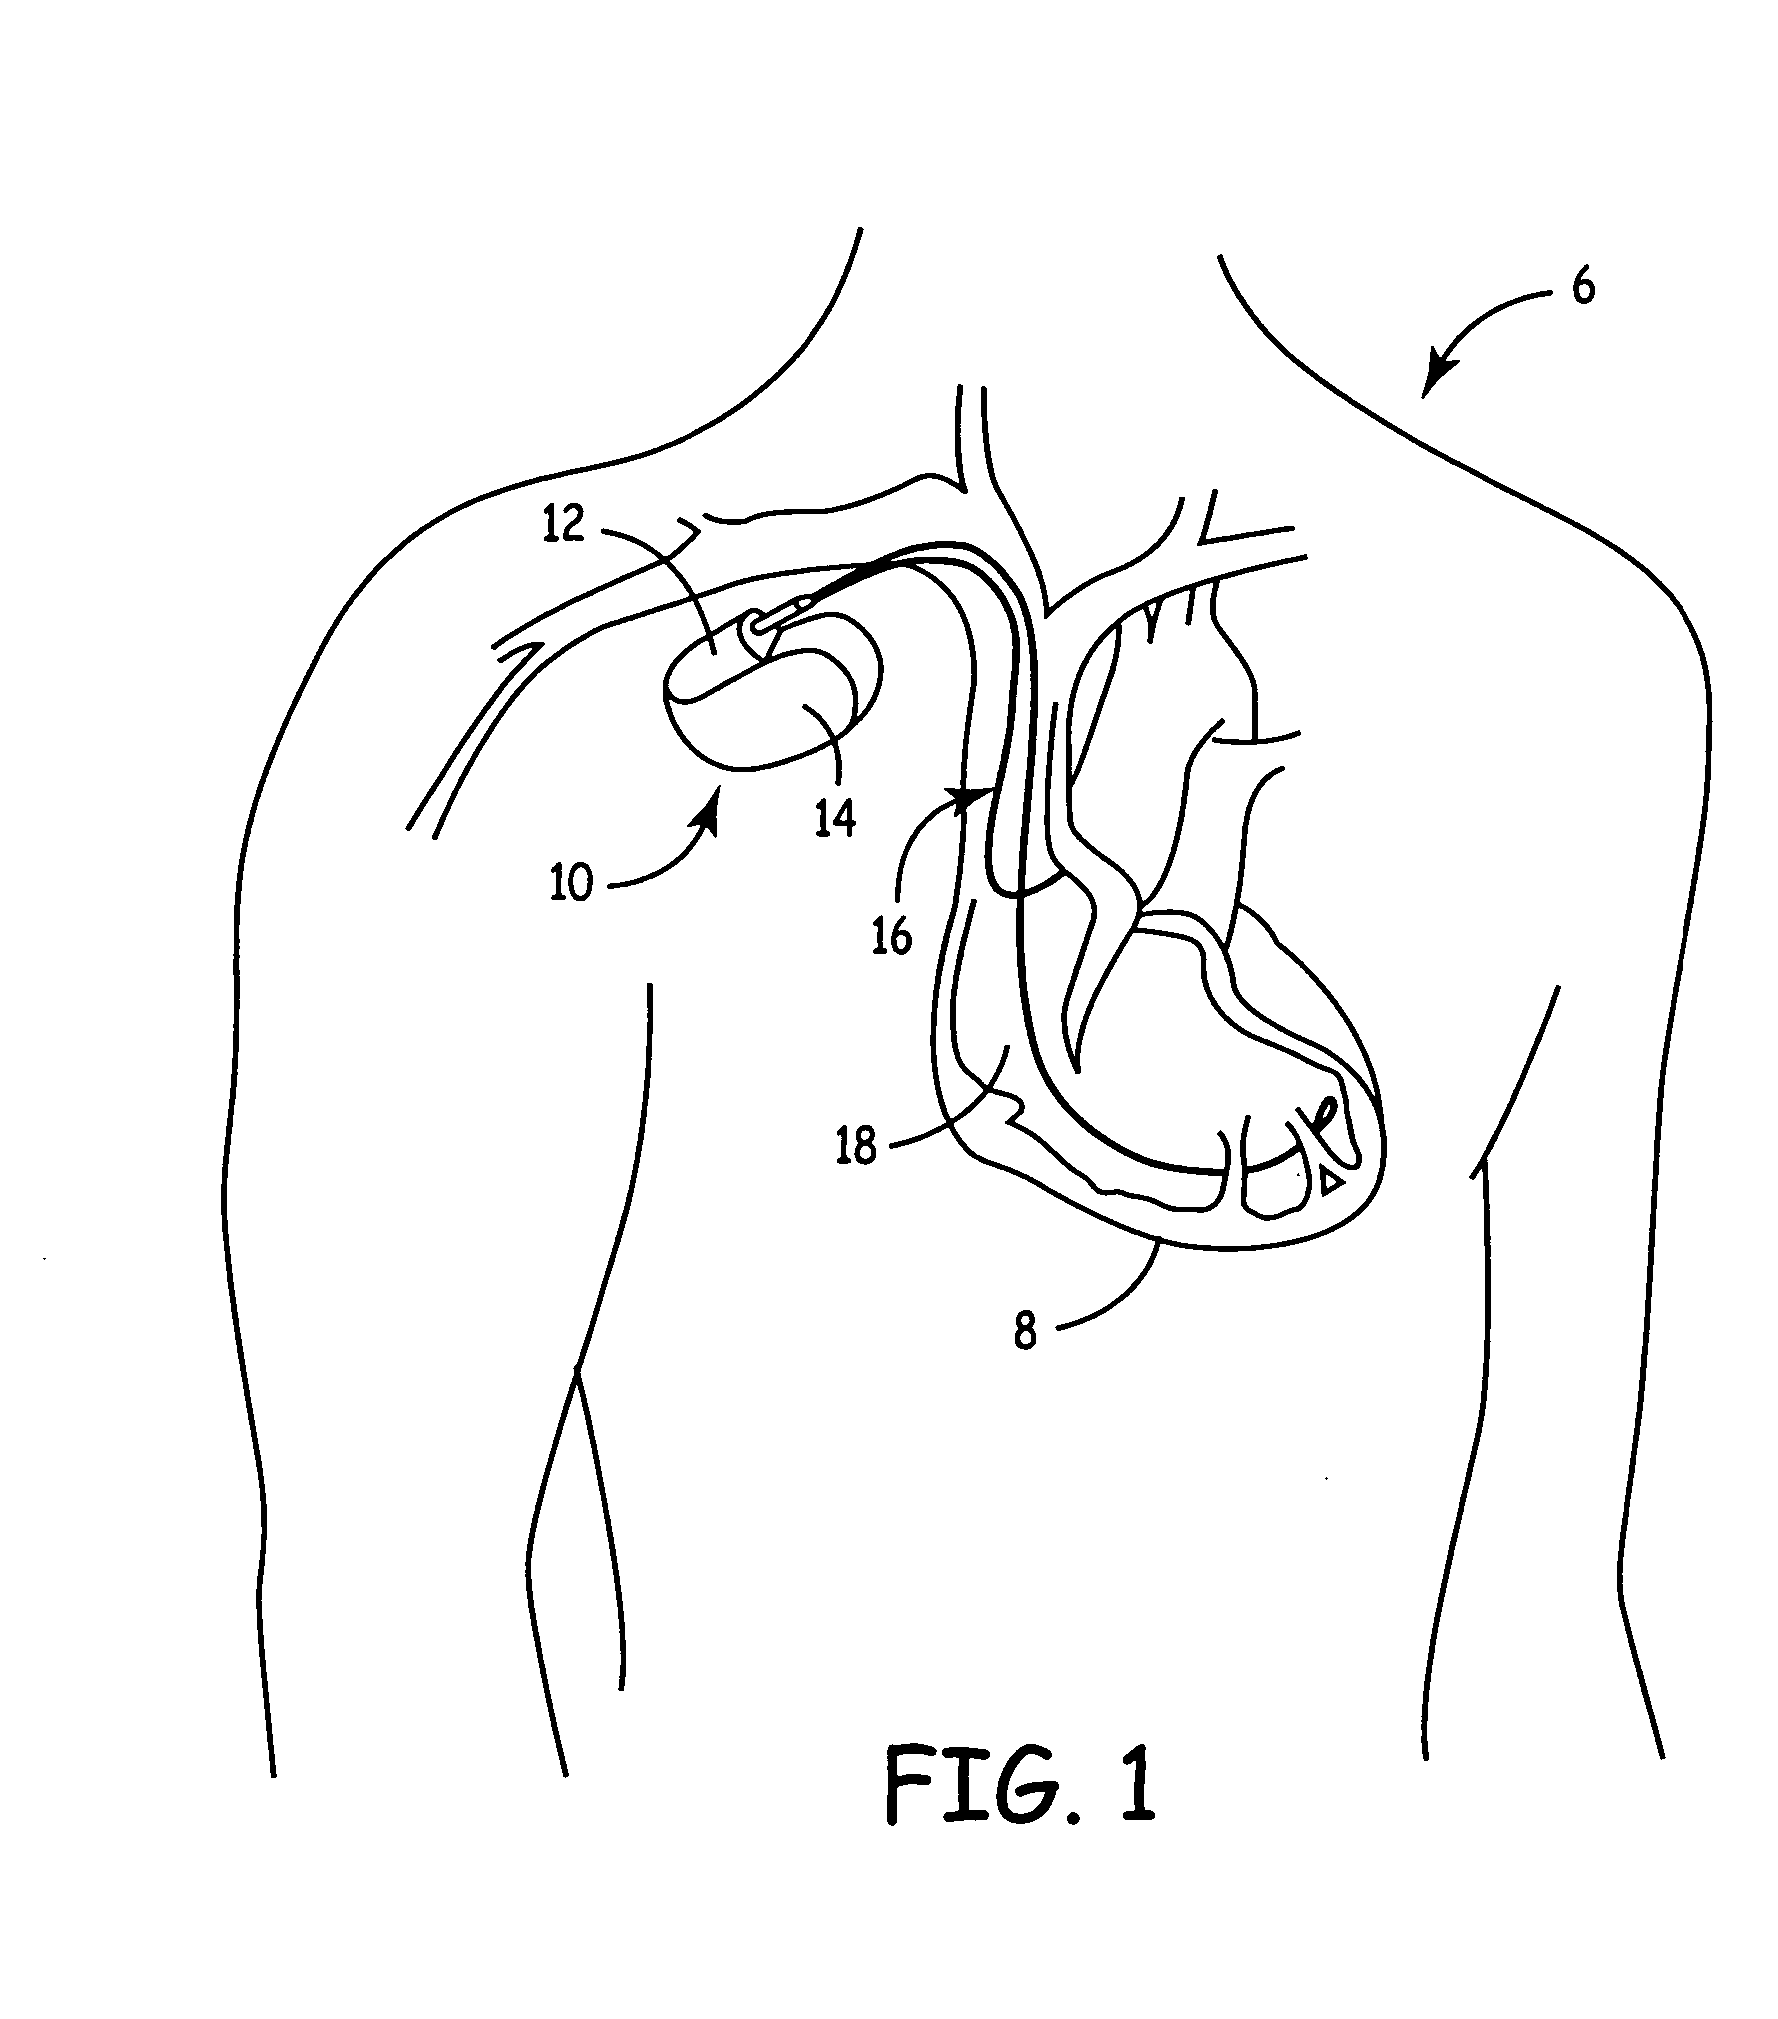 Implantable medical device with ventricular pacing management of elevated heart rates